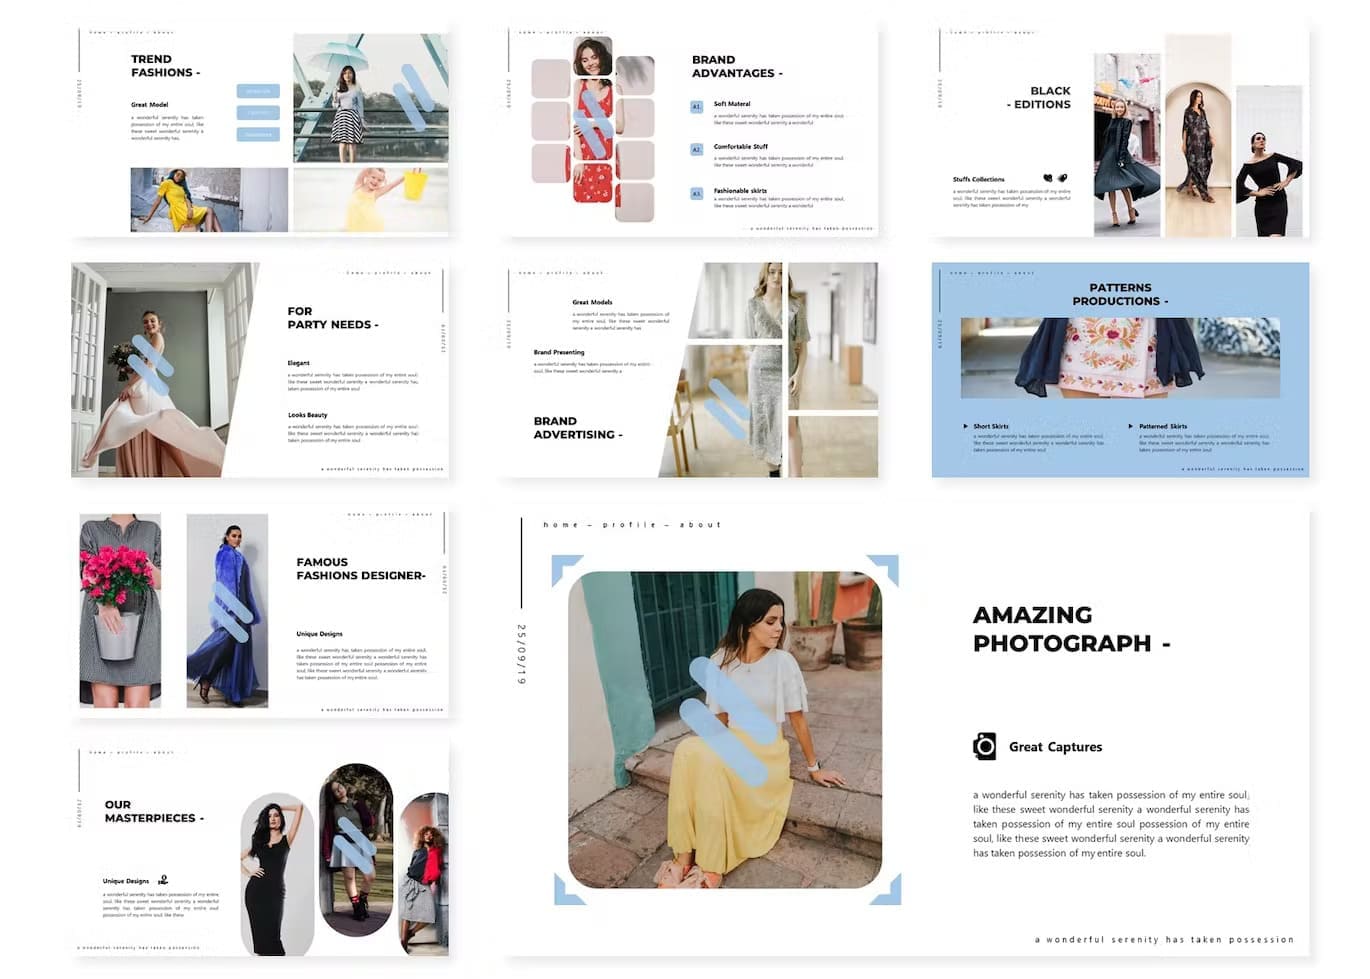 A collection of 9 slides Templates of the report: Trend fashions, Brand advantages, For party needs.